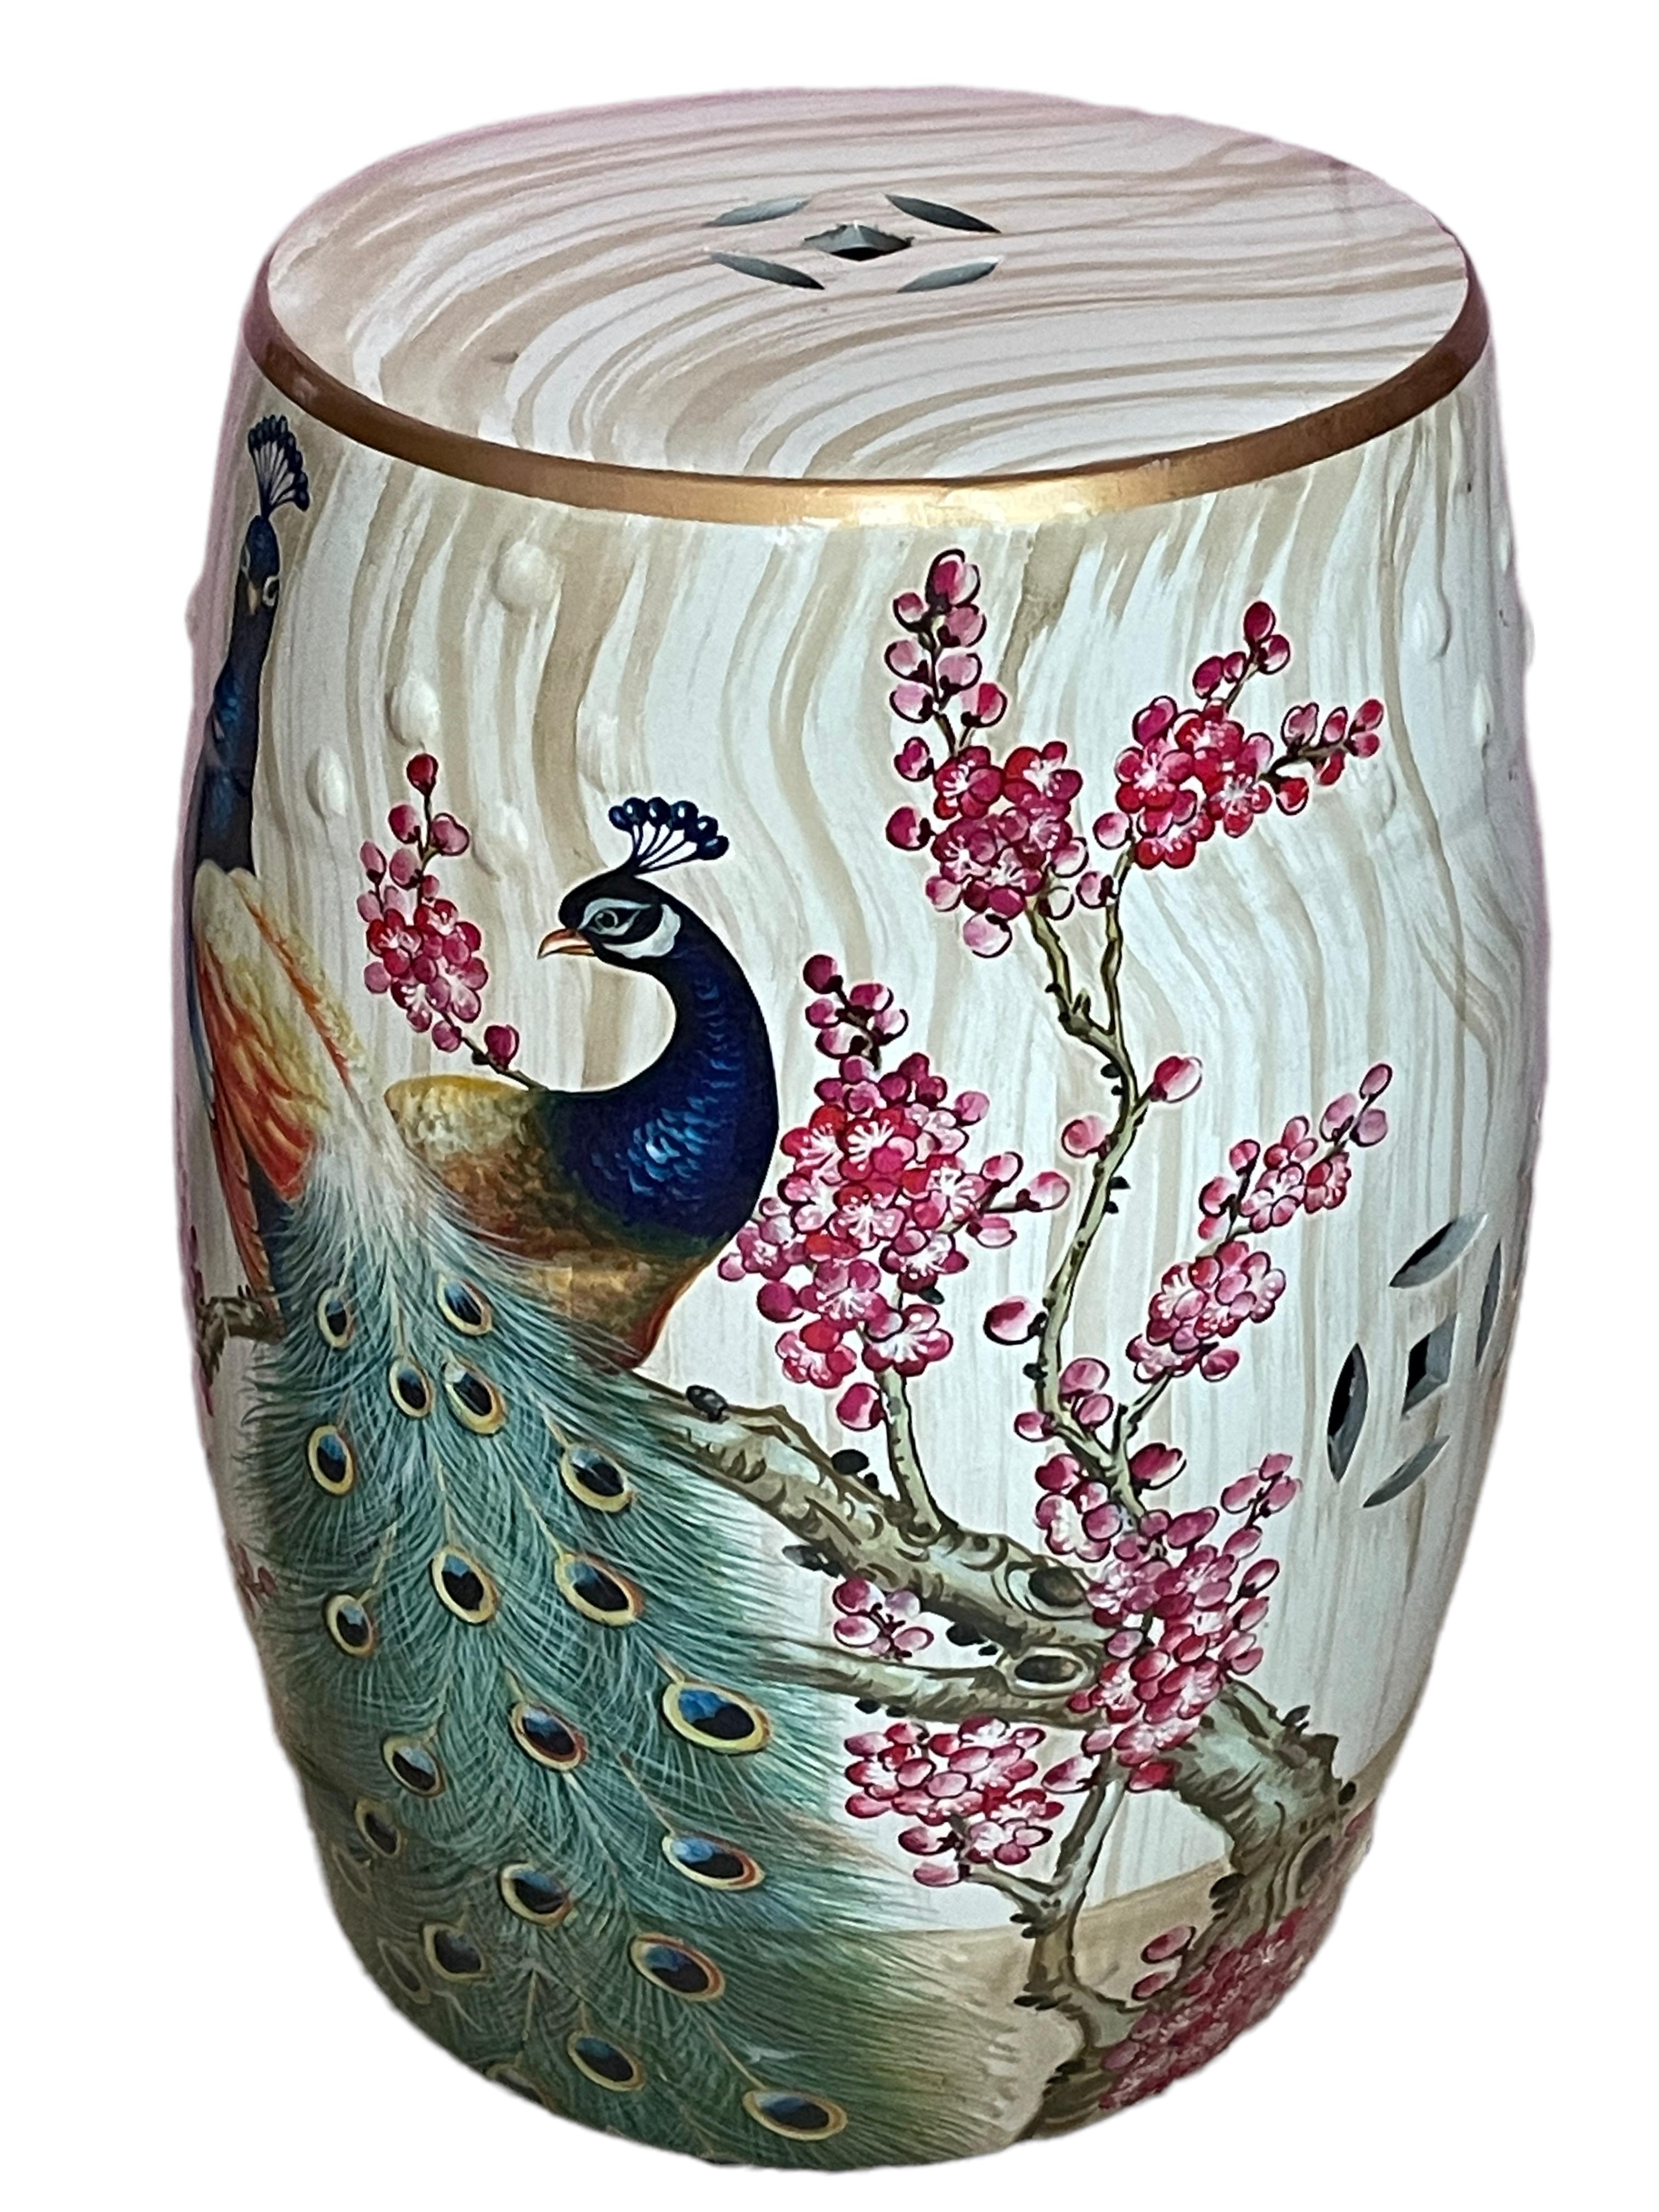 Ceramic Mid-20th Century Chinese Export Hand-Painted Garden Stool Flower Pot Seat For Sale